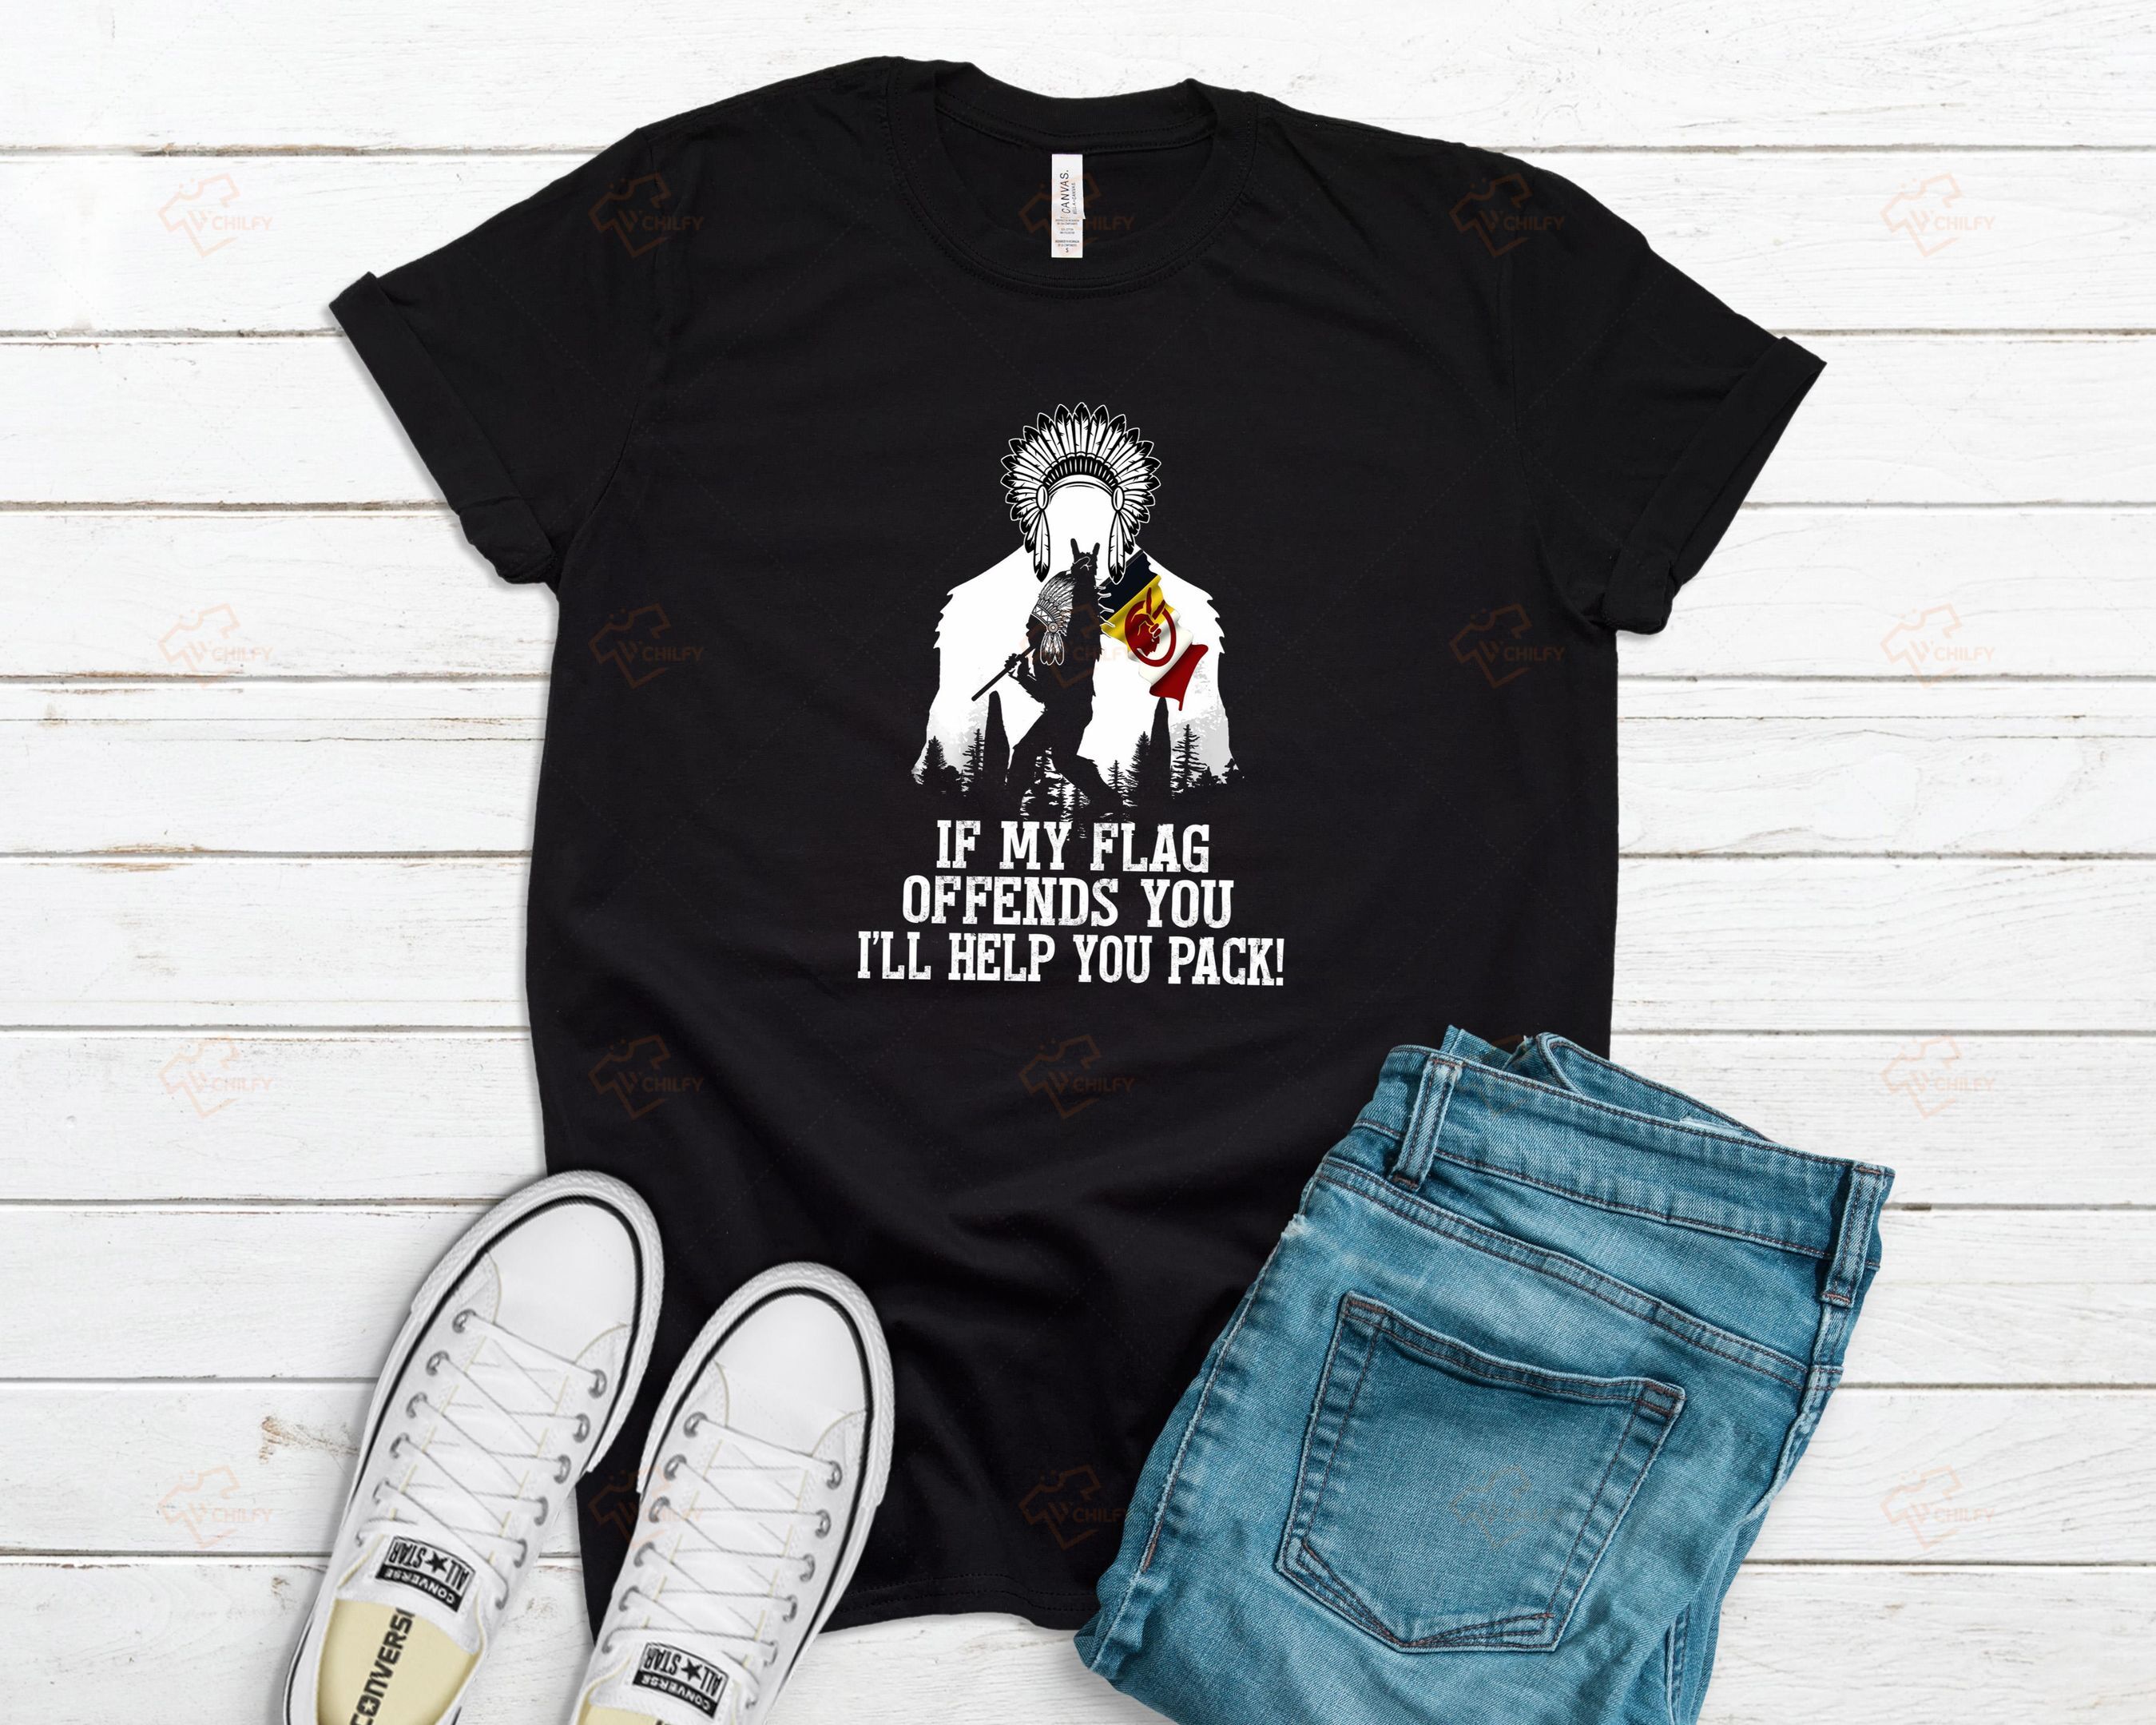 if my flag offends you, i’ll help you pack shirt, badass Native t shirt, Native American shirt, gift for Indigenous people